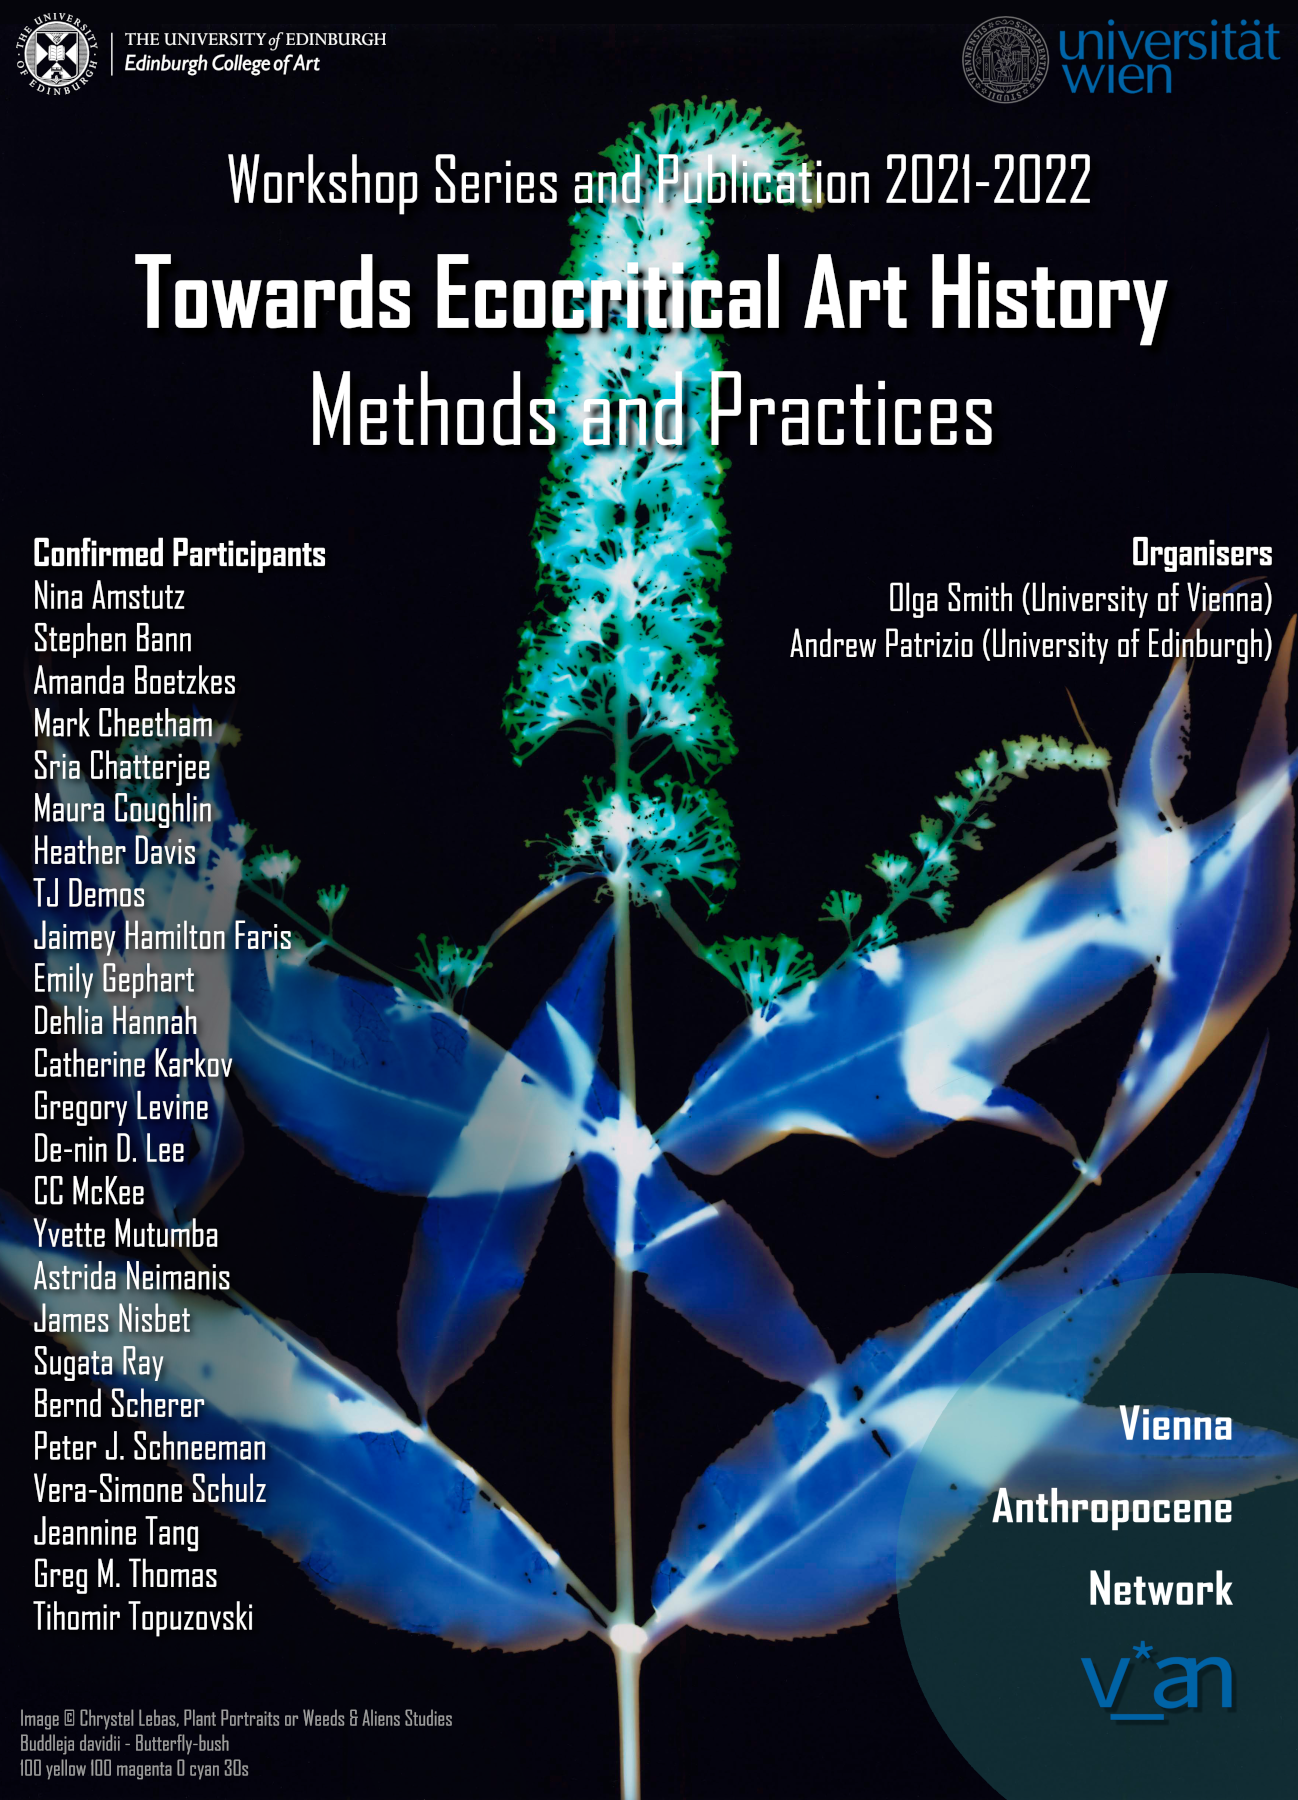 Teaser image for the workshop series "Towards Ecocritical Art History" (white text on a black background with a bluish plant)